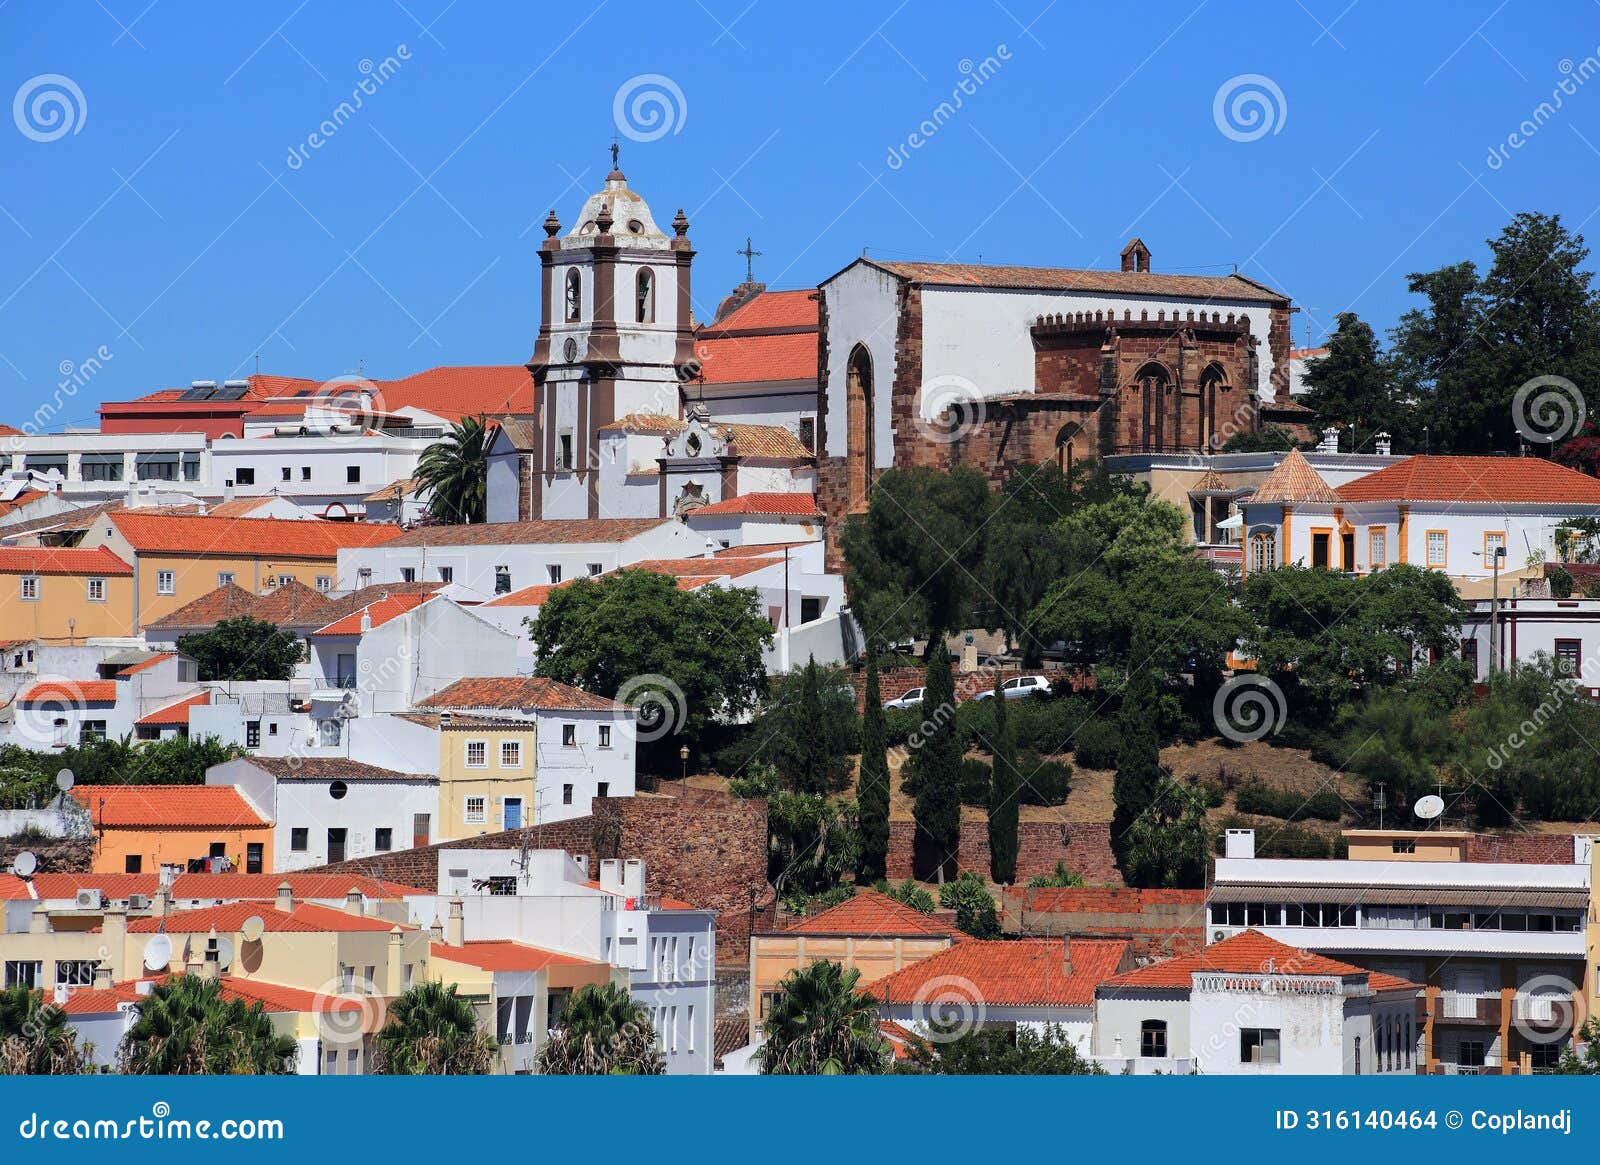 portugal, algarve region, panoramic view of the historical town of silves